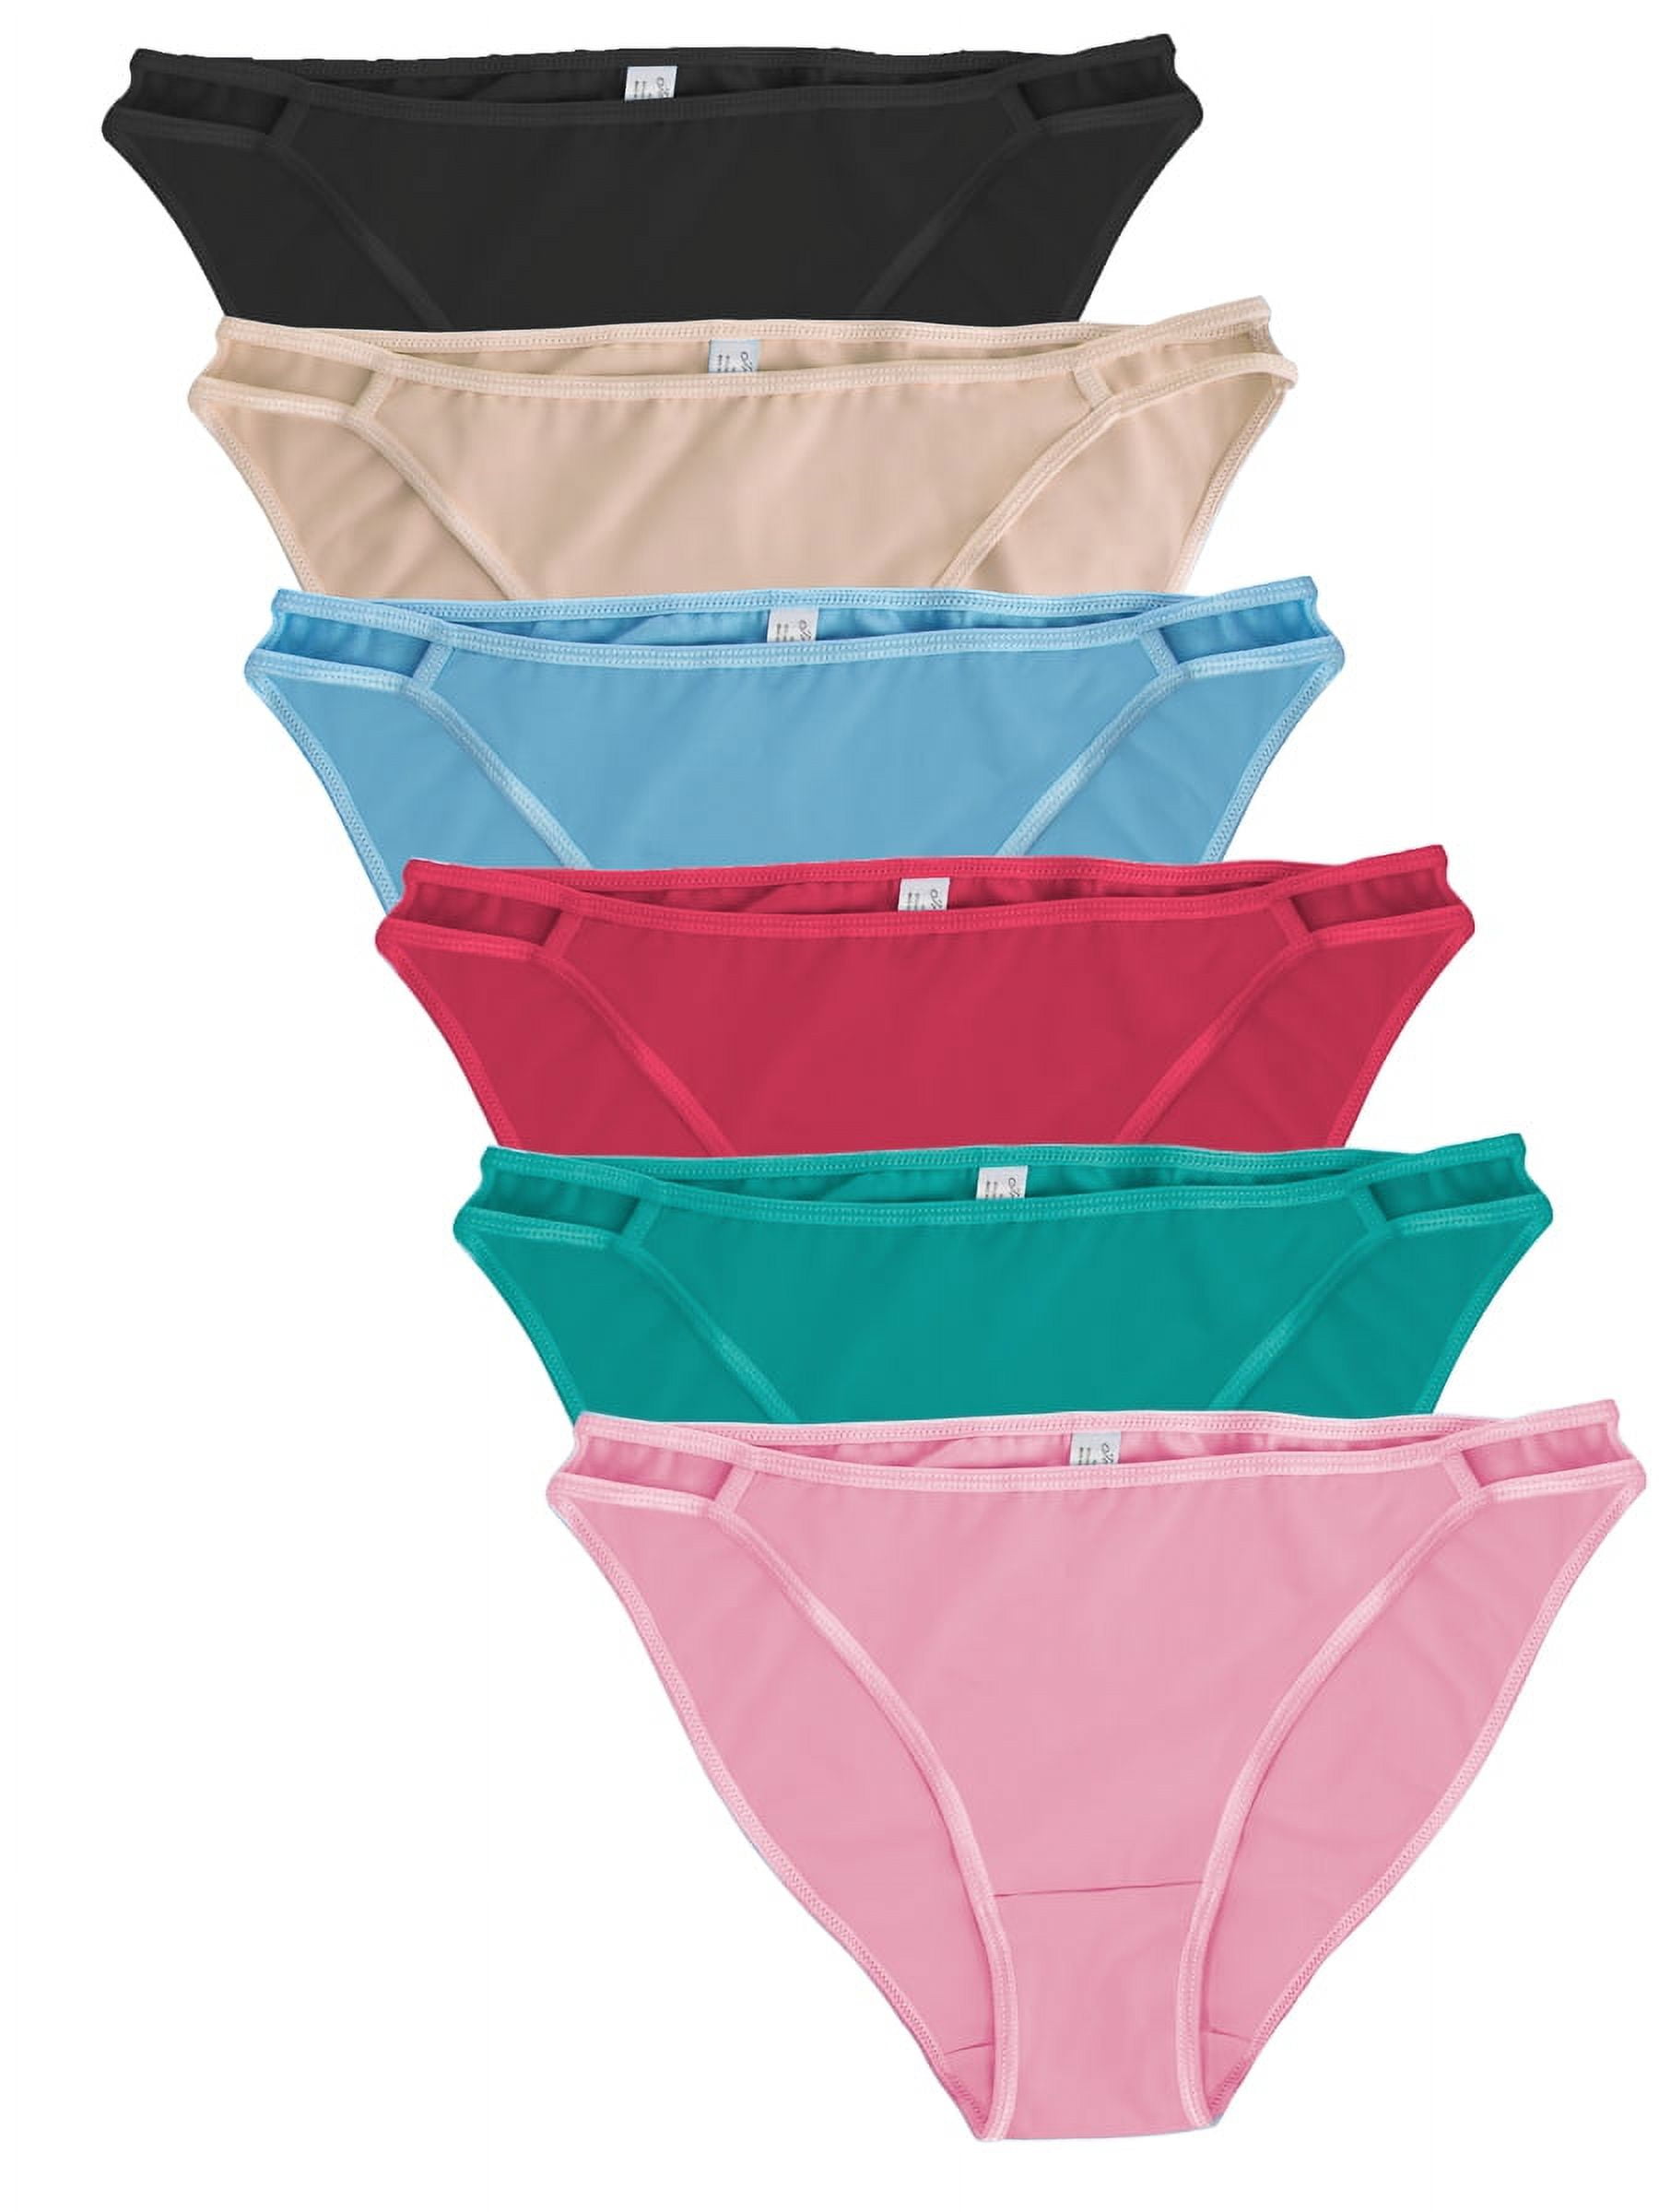 Shop Plus Size 5 Pack Cotton Butterfly Briefs in Multi, Sizes 12-30